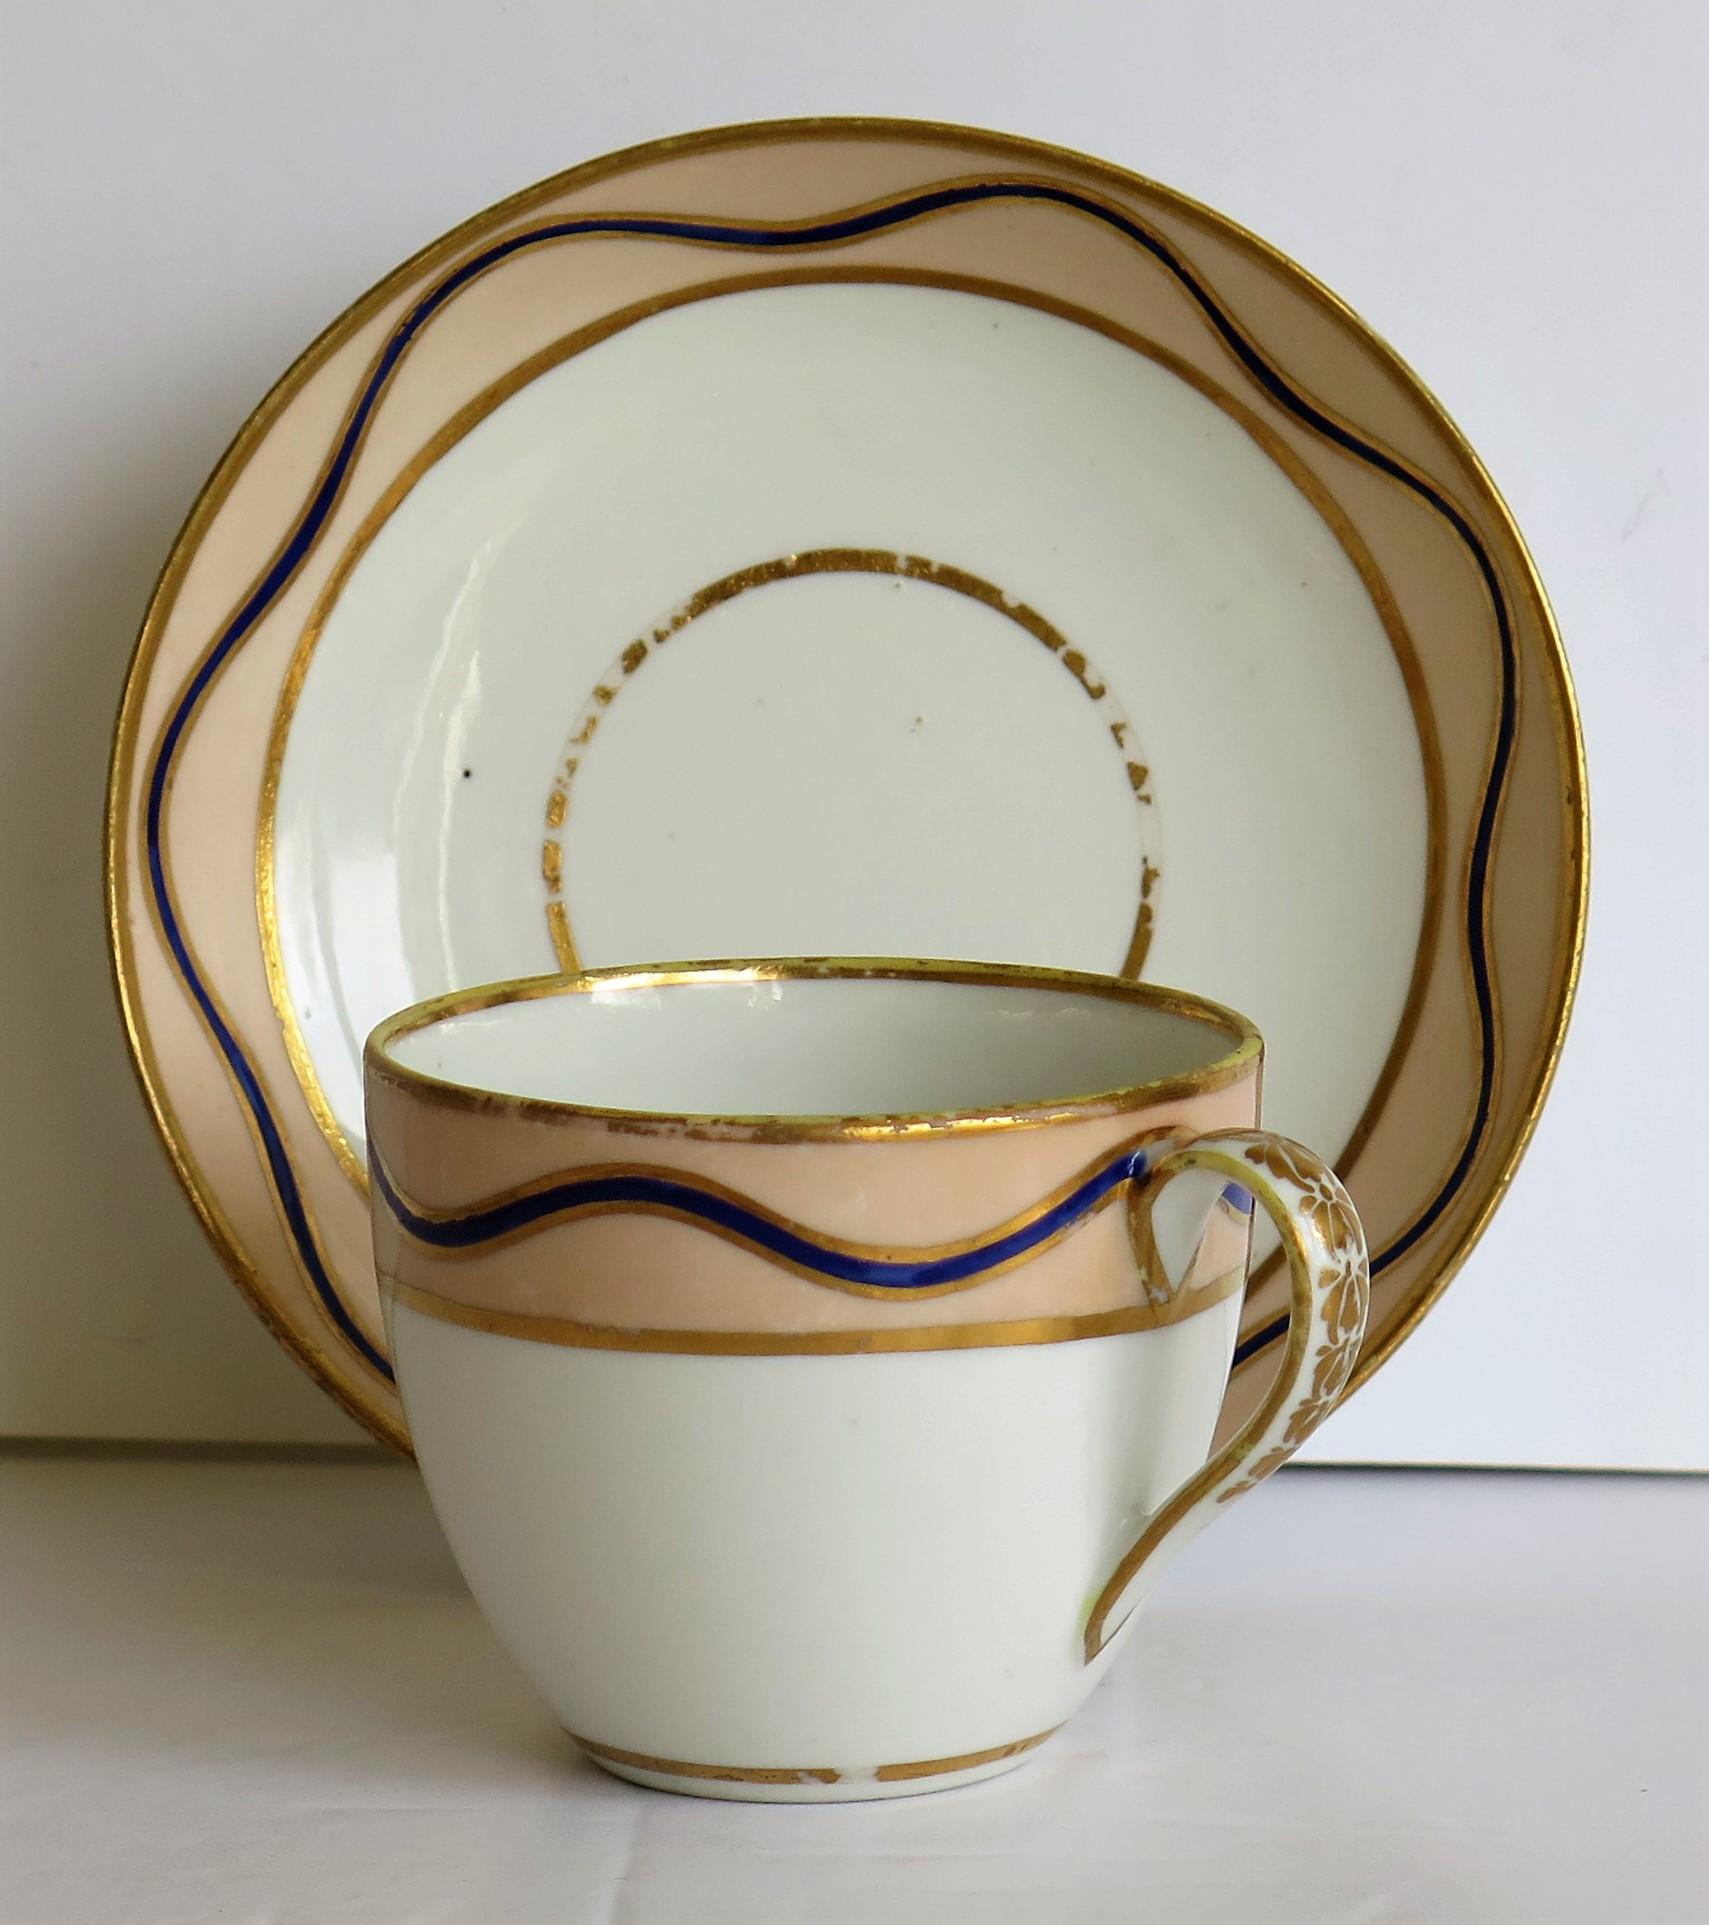 This is a late 18th century porcelain Tea Cup and Saucer in pattern 128 by the Derby factory, Circa 1795.

This is a rare Derby pattern that we have not come across or seen previously

The Cup has the Bute shape with a long loop handle and the